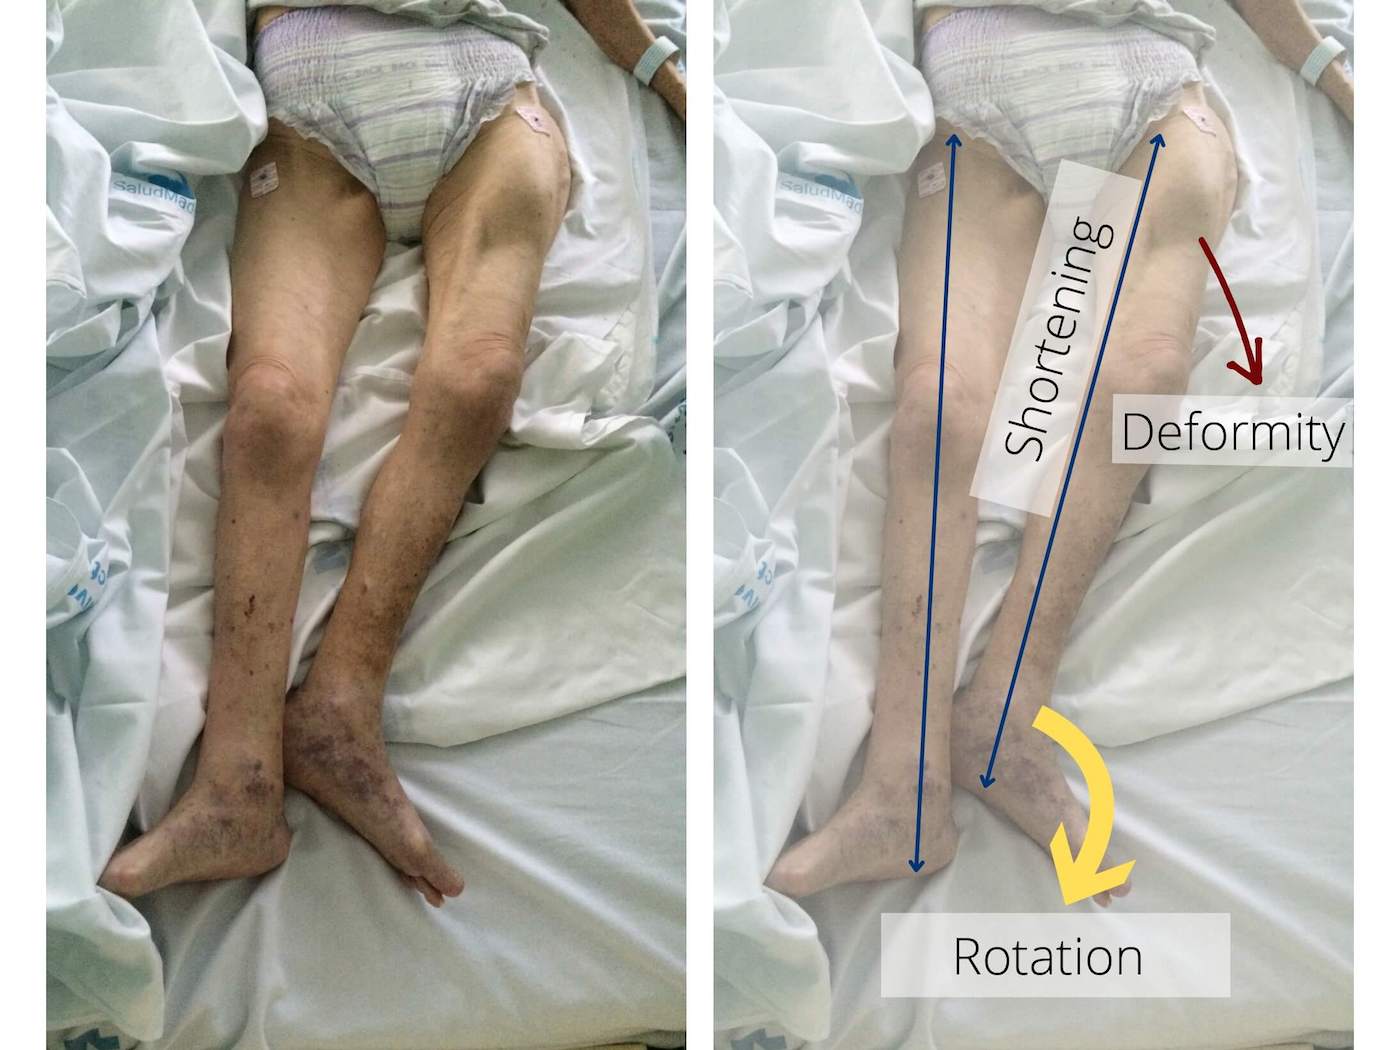 Patient with femoral neck fractured: his leg is shortened and with external rotation